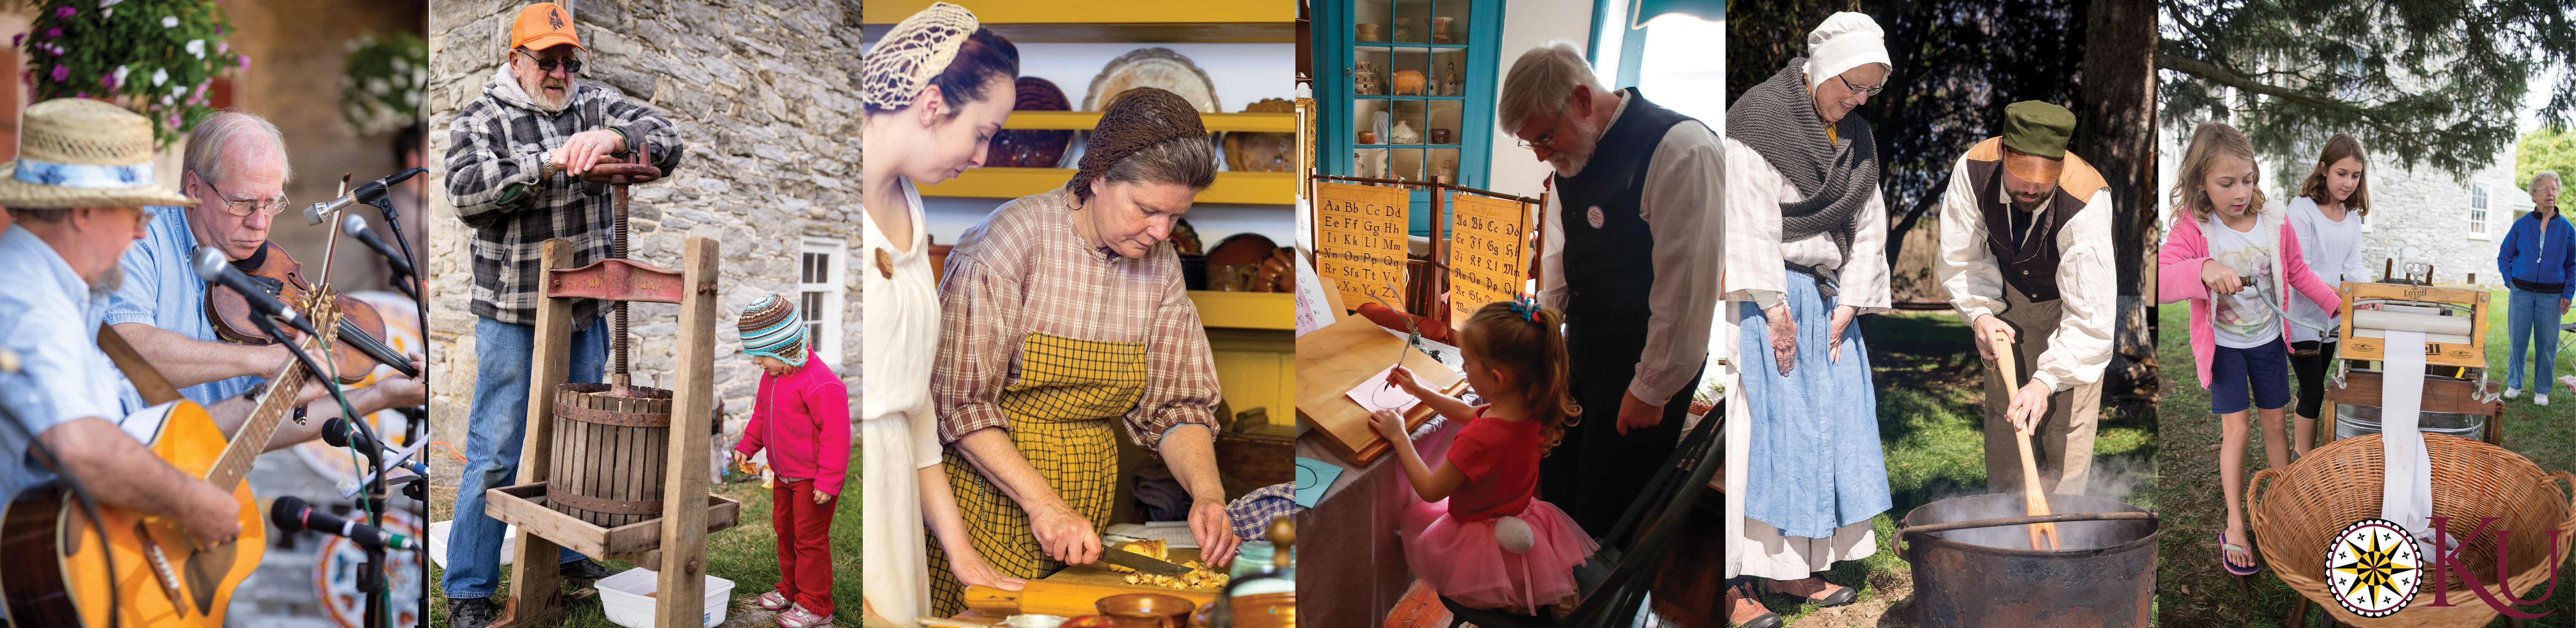 A collection of people at the Heritage Center. Two musicians, a man helping a child with an apple press, women baking, a man helping a small girl write calligrapy, a young man and older woman over a dye cauldron, and children using old laundry tools.